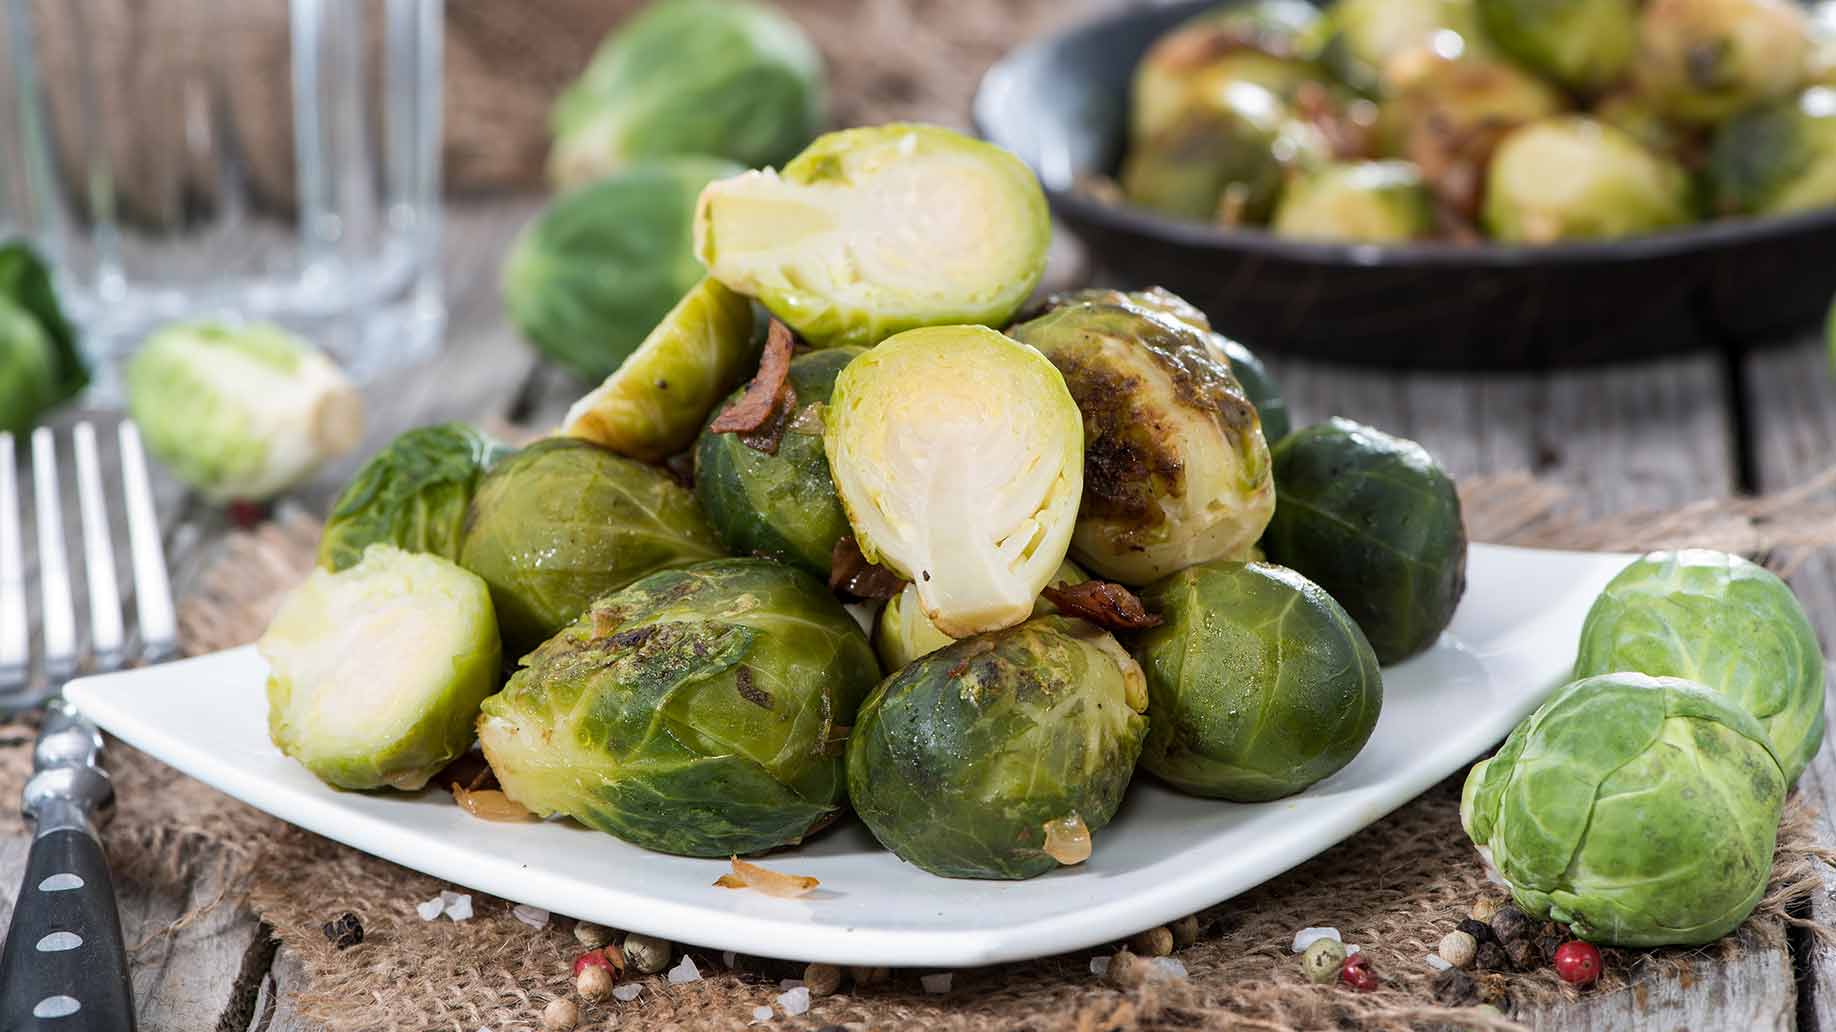 roasted brussels sprouts salt pepper ham healthy snack ideas